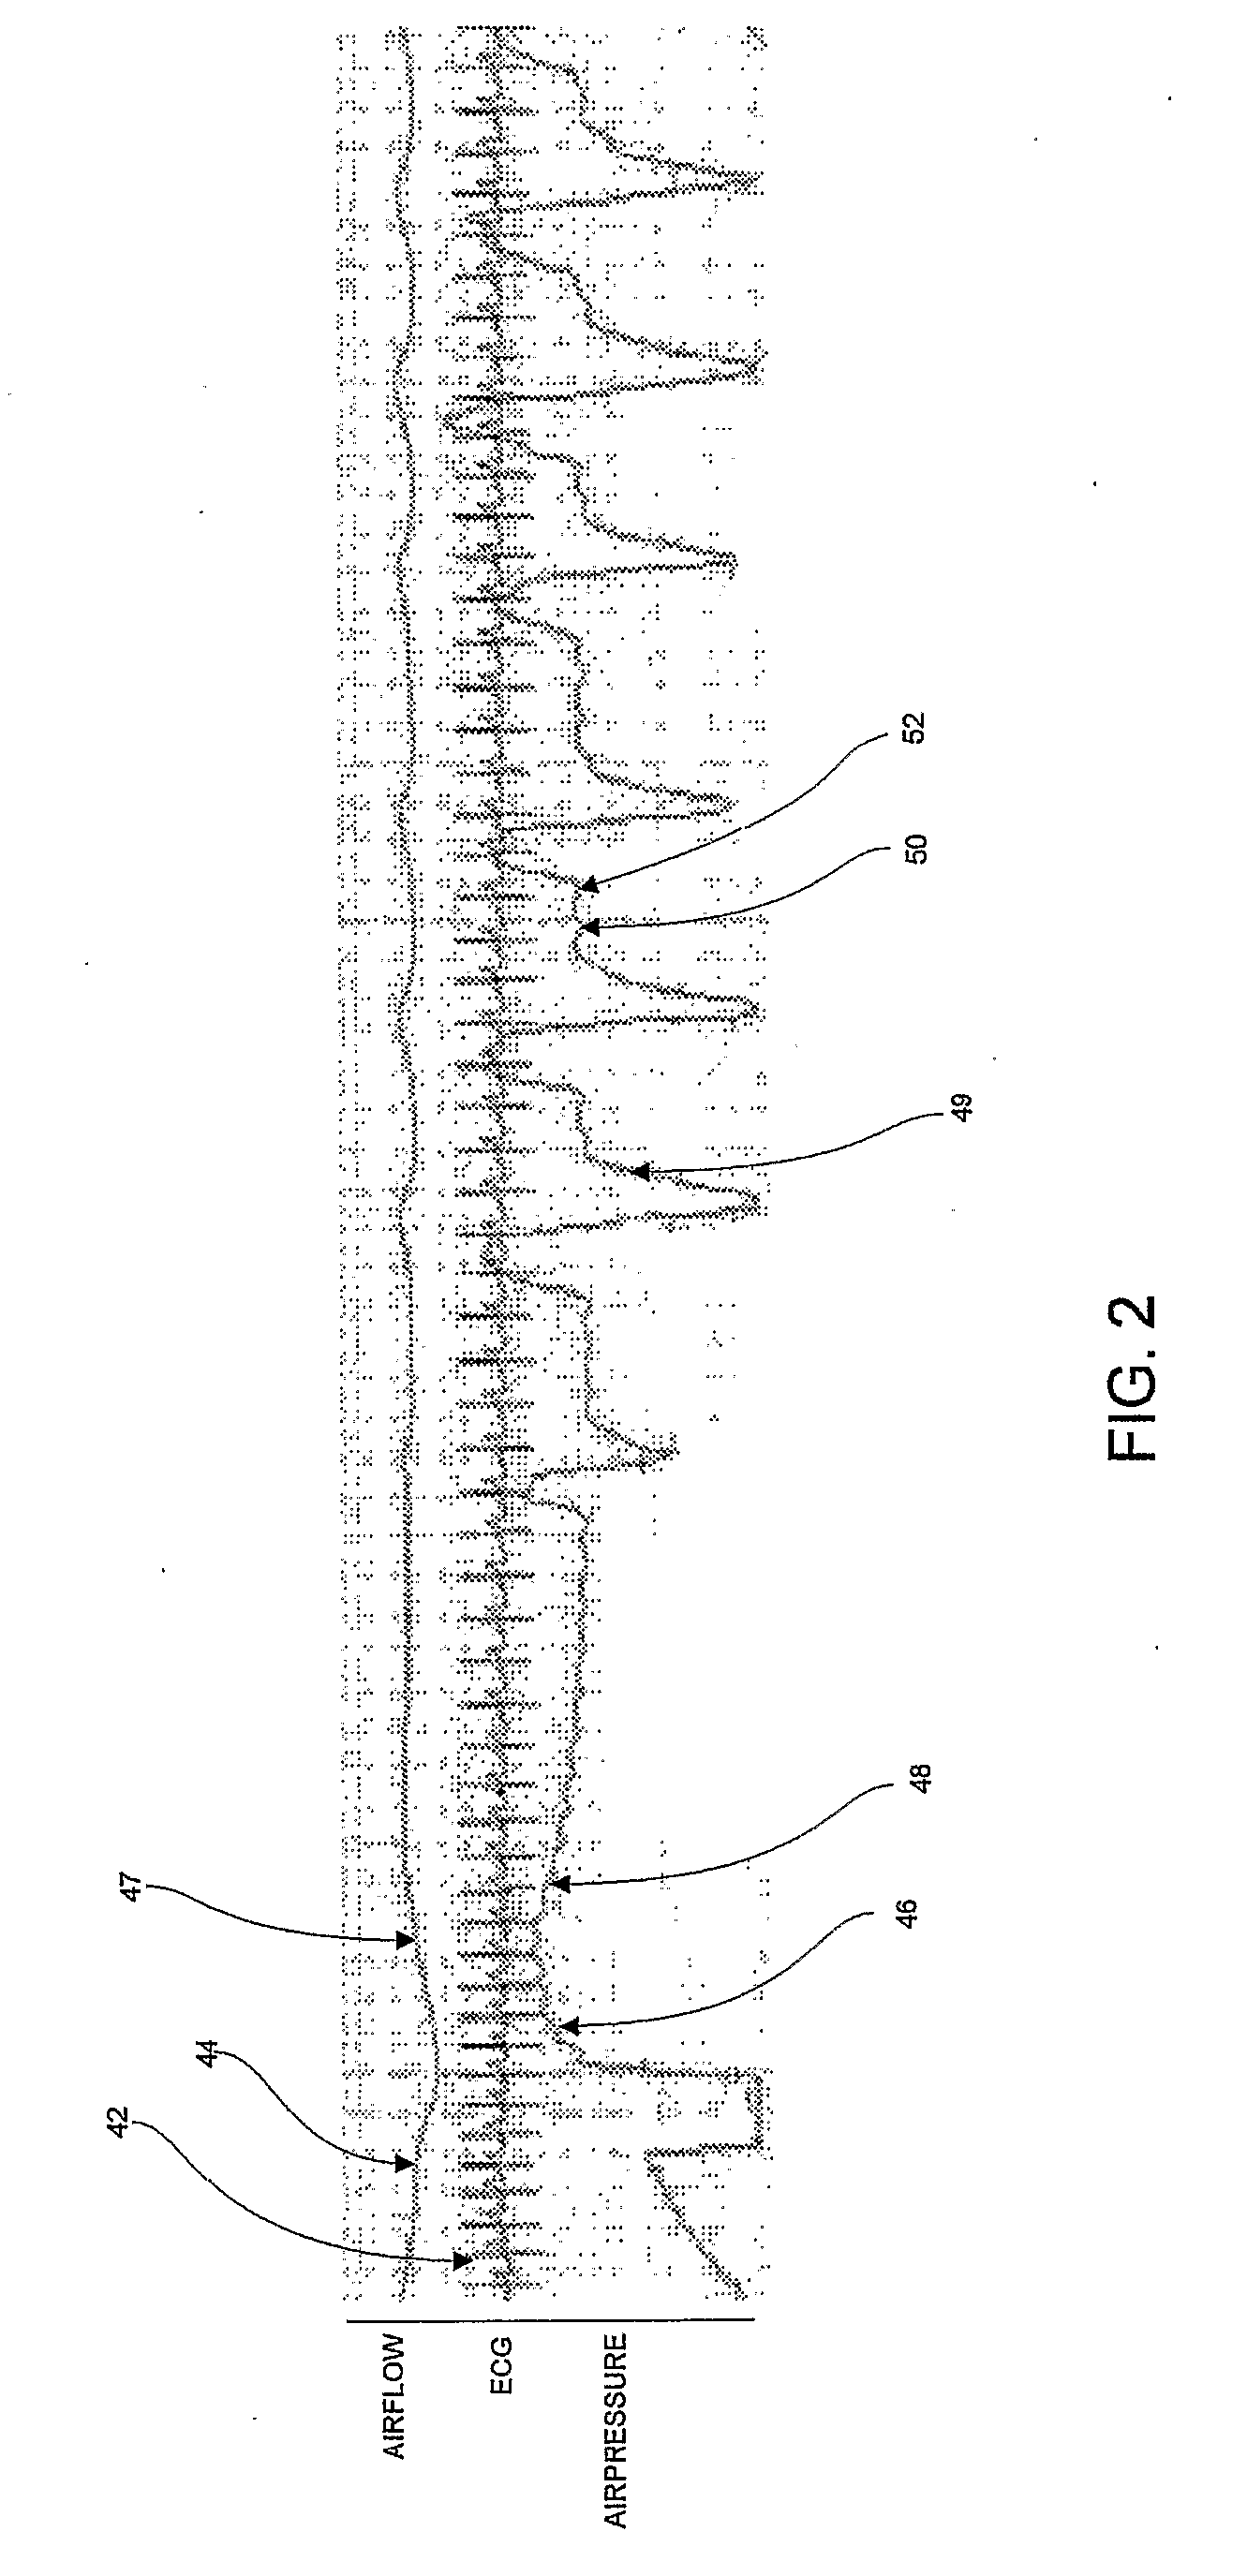 Cardiac Monitoring And Therapy Using A Device For Providing Pressure Treatment Of Sleep Disordered Breathing